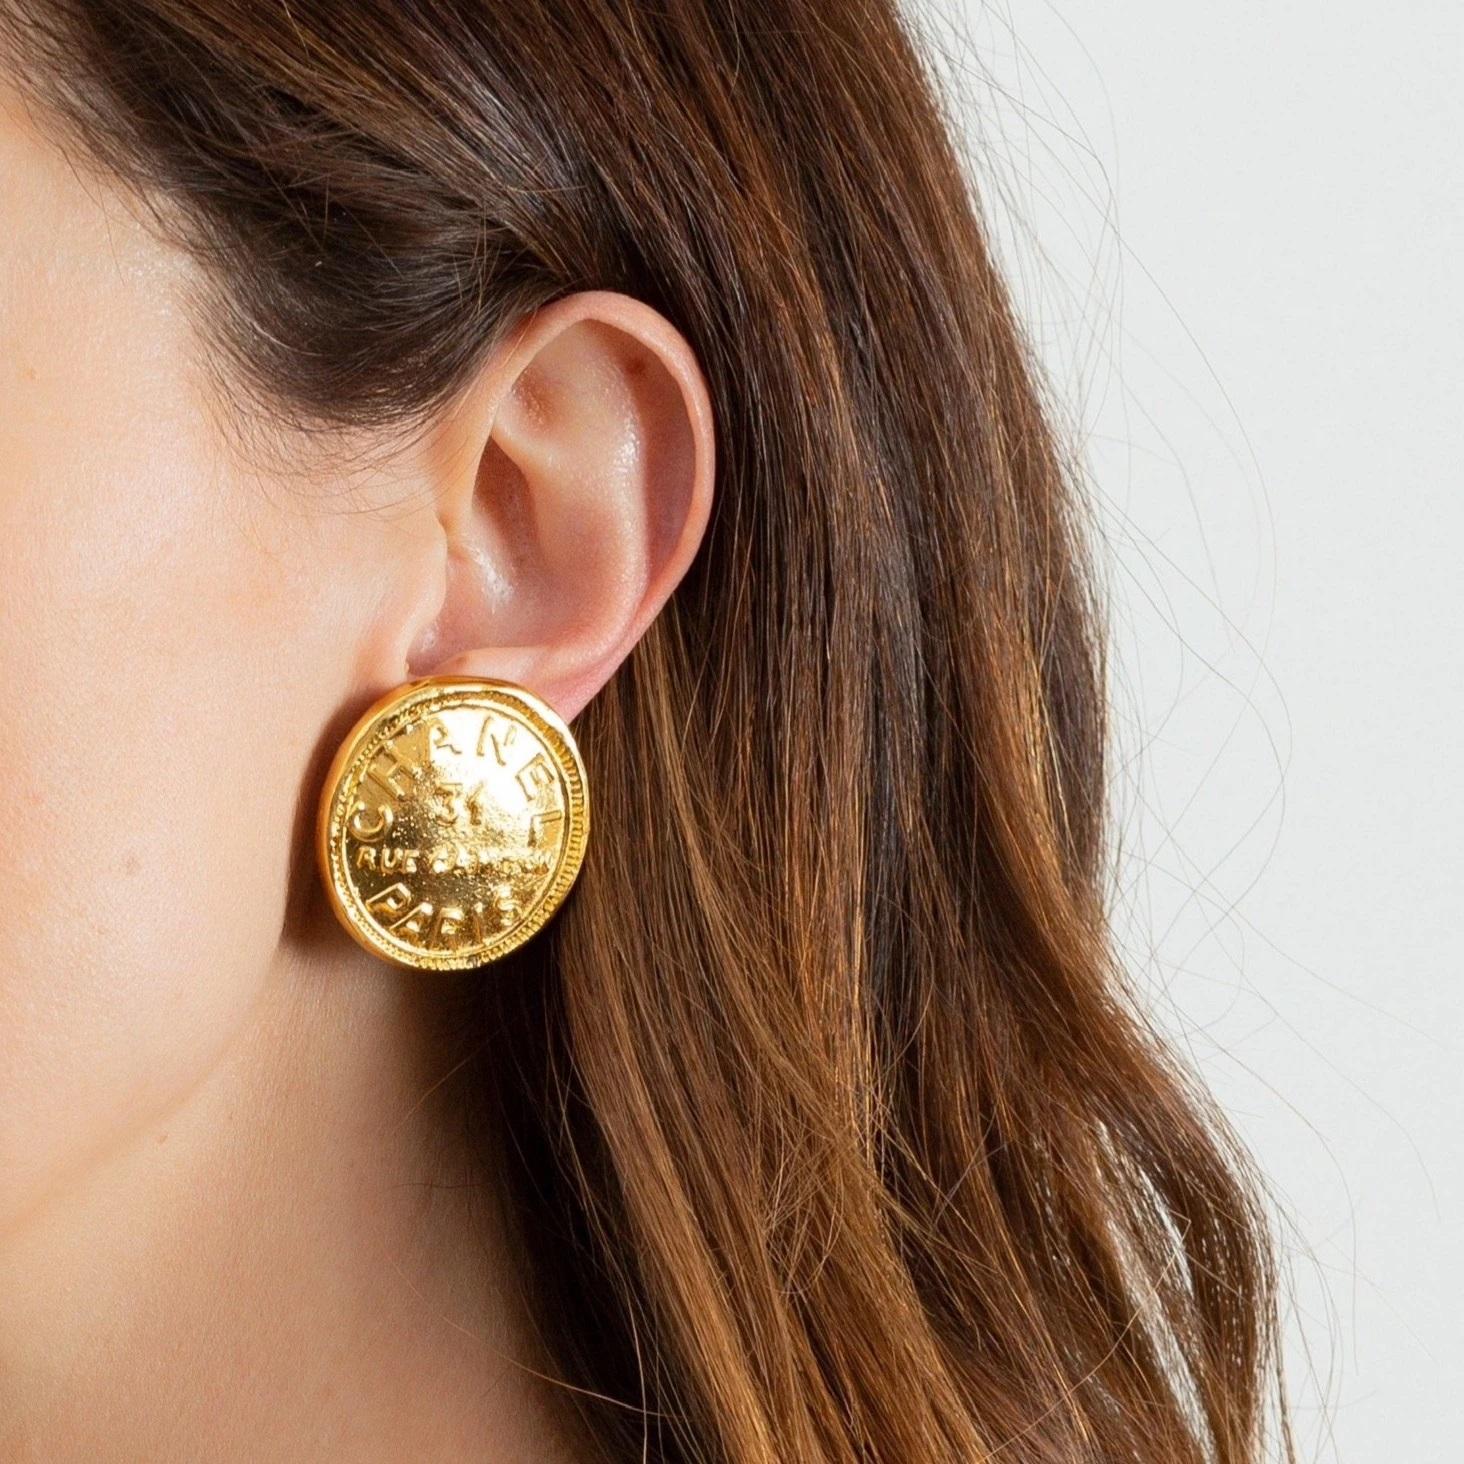 Chanel 1980s vintage clip on earrings

Large and iconic statement earrings proudly featuring the address of the first Chanel boutique in Paris

Detail
-Made in France in the early 1980s
-Crafted from a high quality gold plated metal and embossed